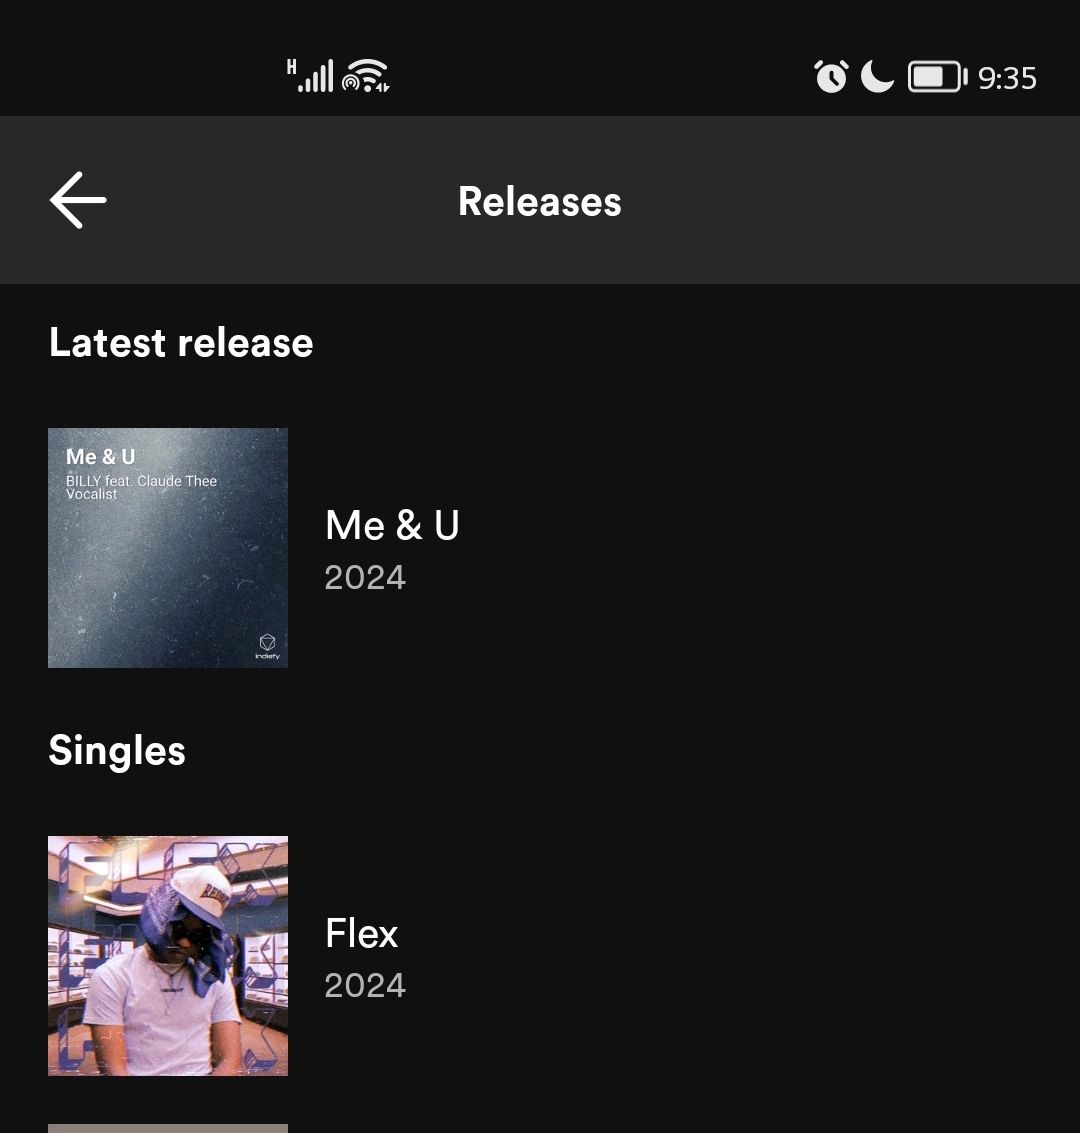 Spotify gang letss goooooo💯
'Me & U'
open.spotify.com/track/0ktkVbVV…
'Flex'
open.spotify.com/track/66szB4Nh…
 It's all yours now

#music #hiphop #musician #rnbmusic #Spotify #flex #holdmecloser